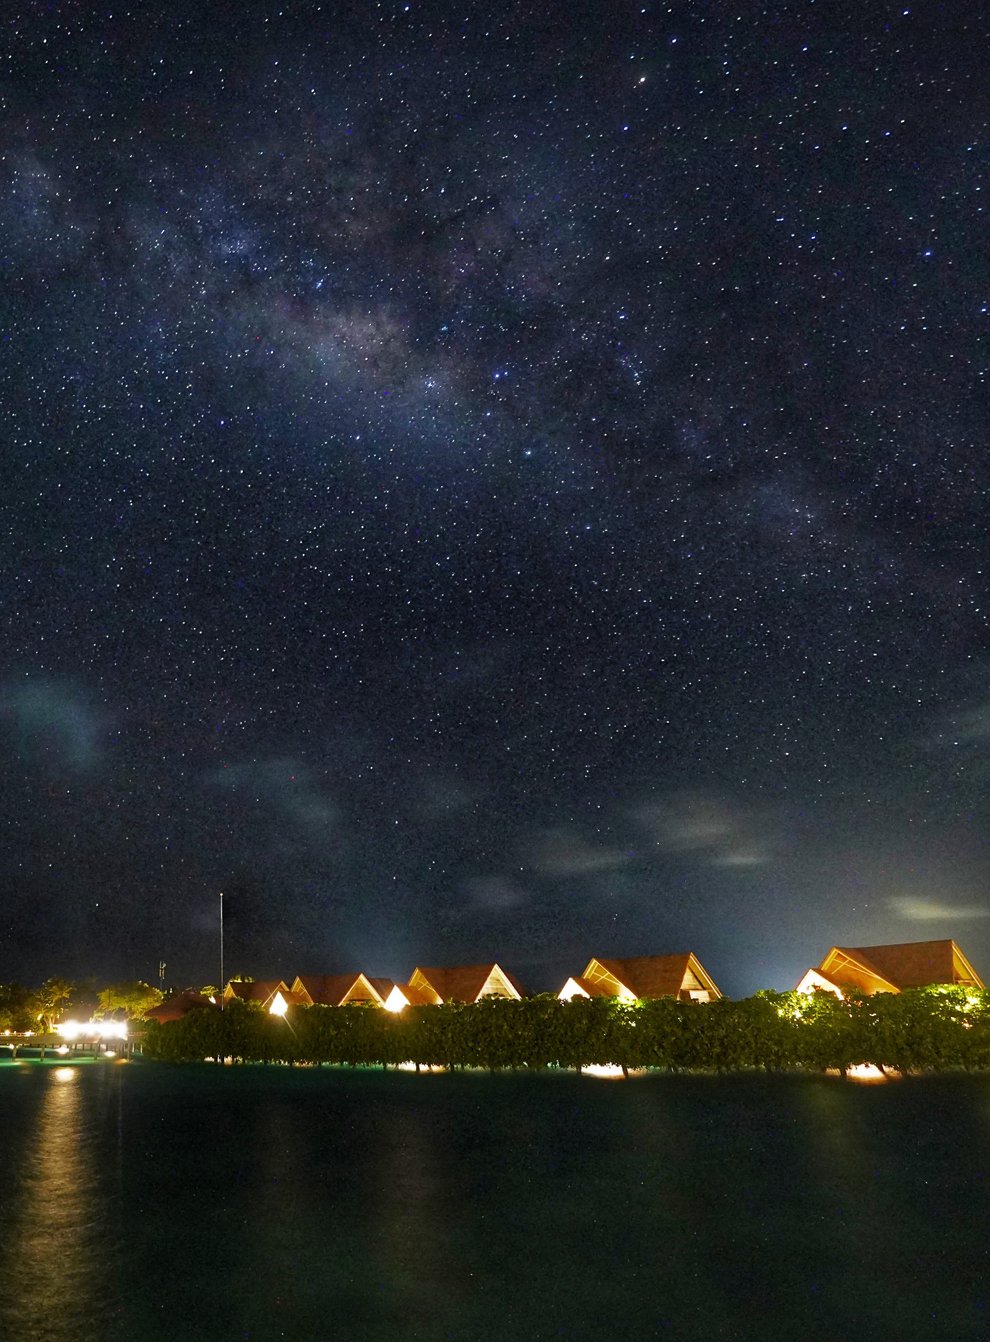 The Milky Way pictured above the lights of Milaidhoo island at night (Owen Humphries/PA)